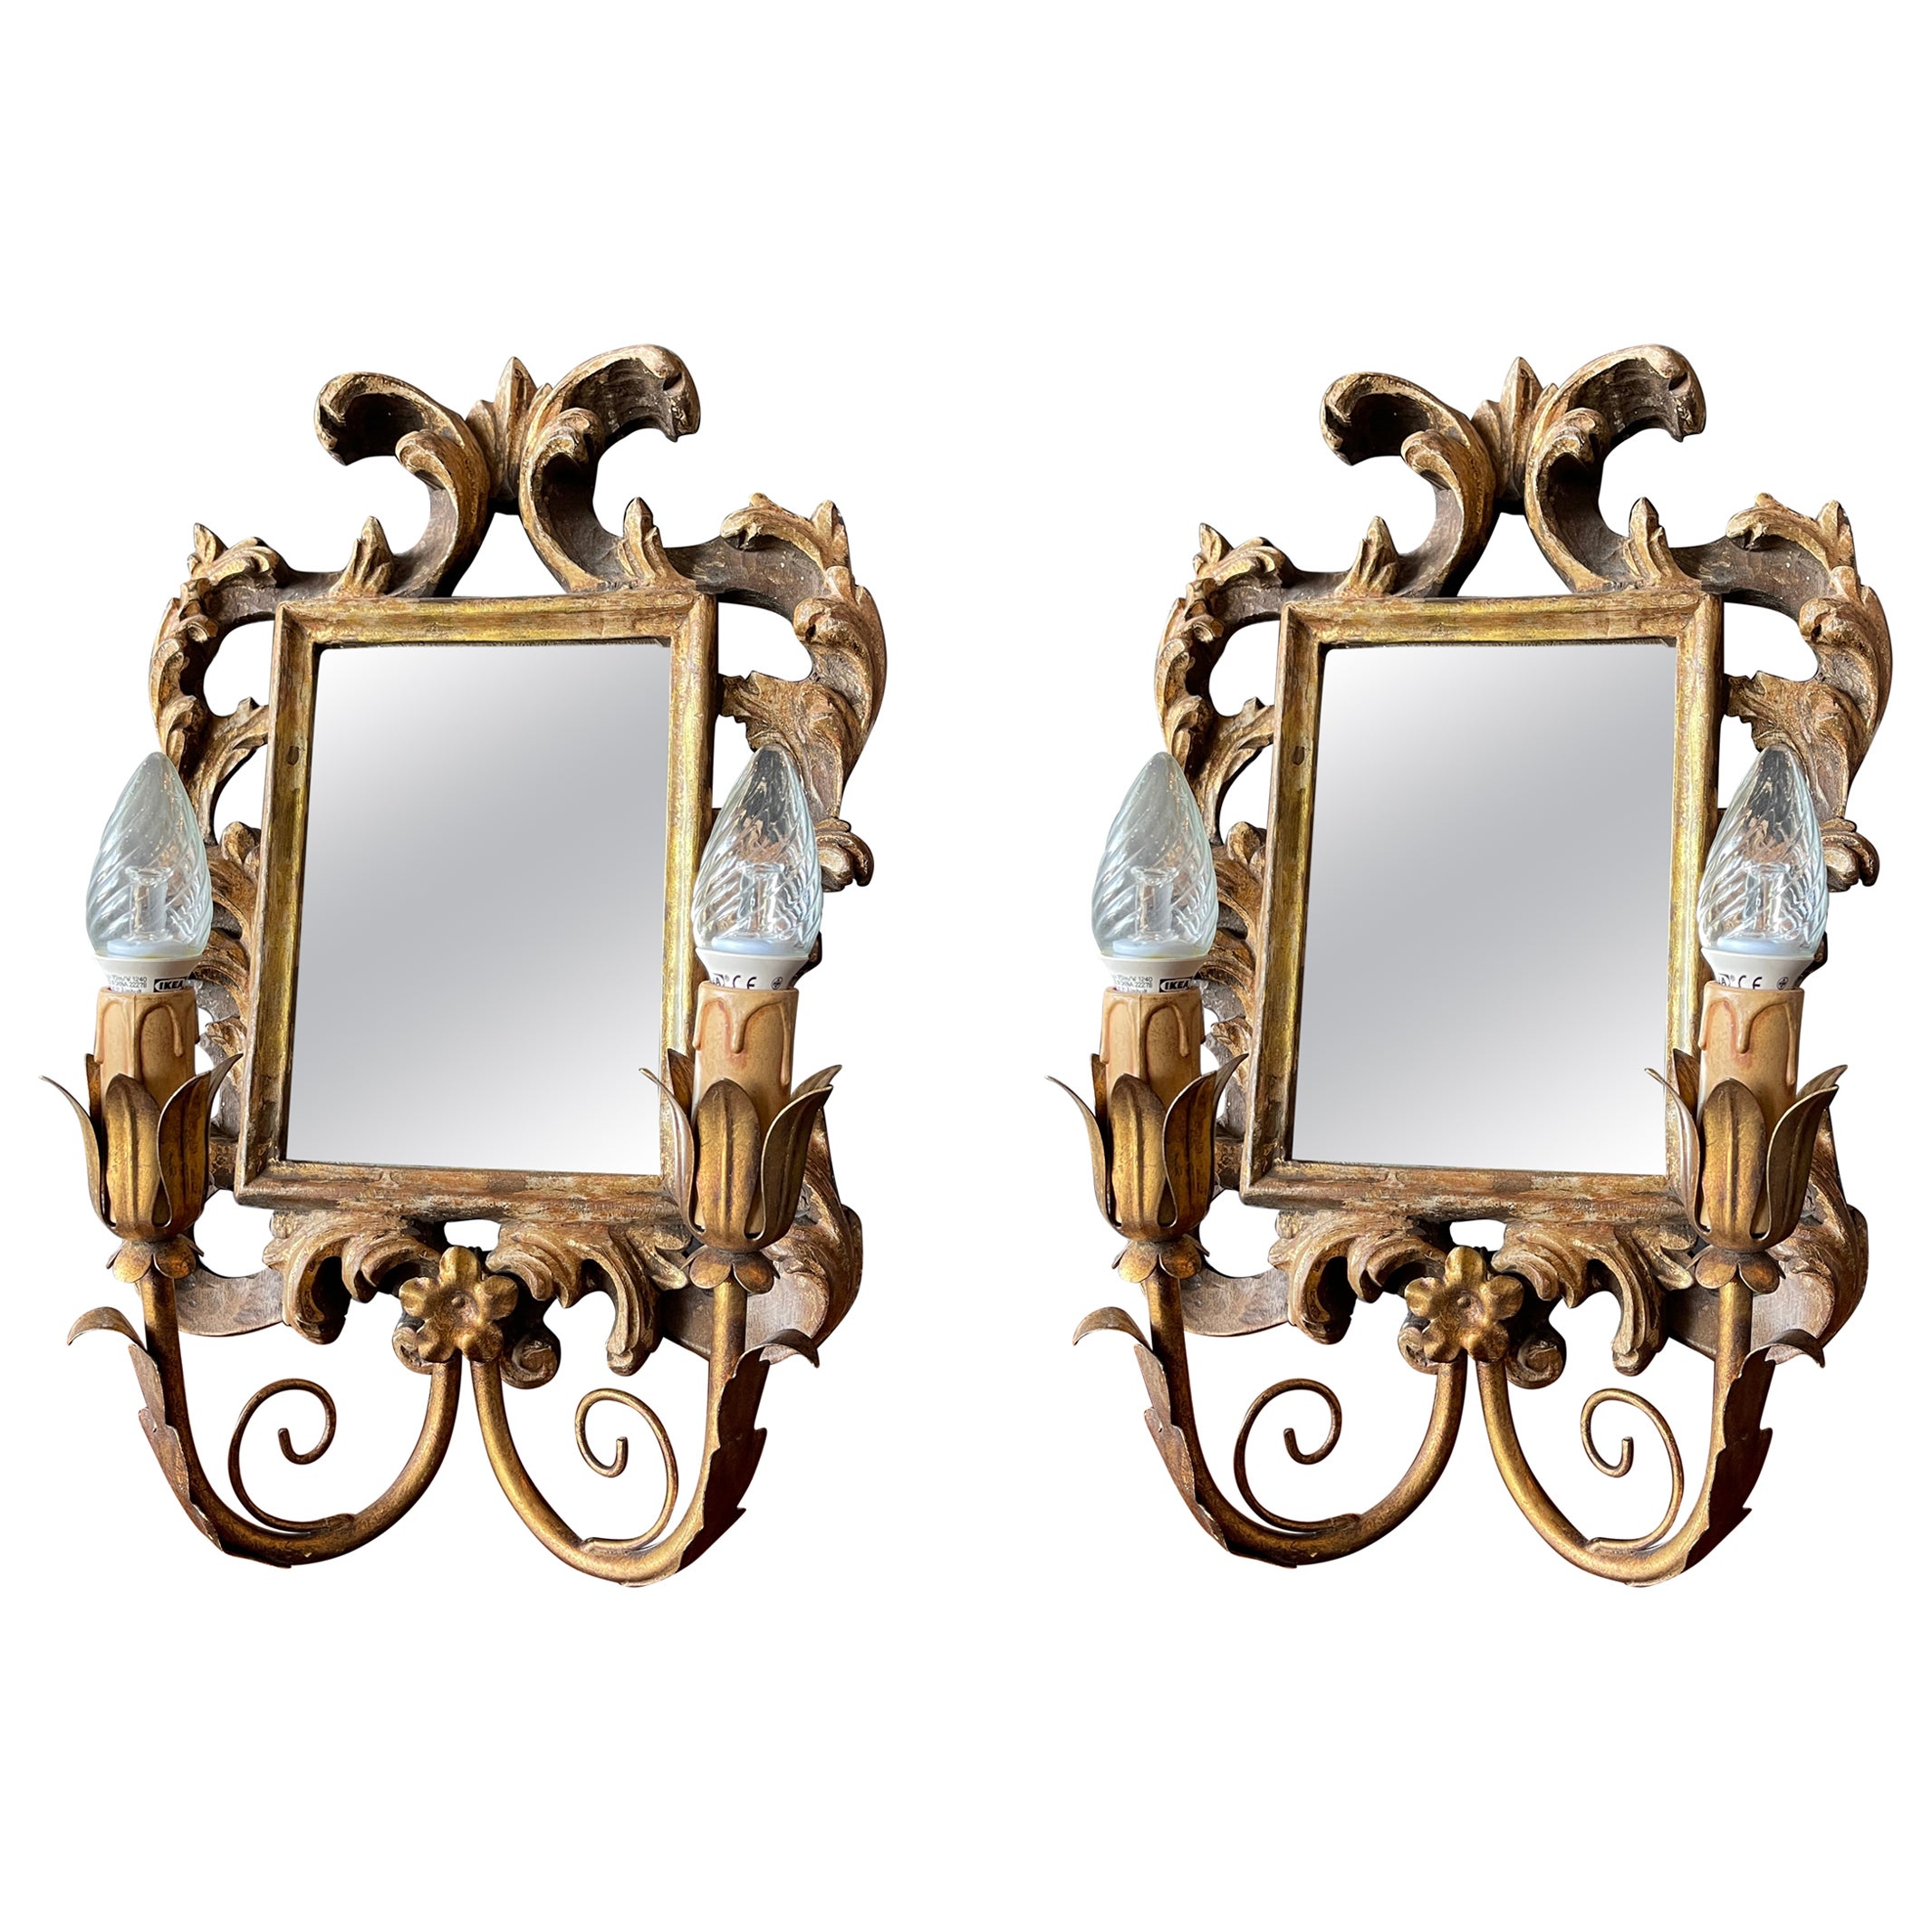 Pair of Antique Giltwood Carved Mirror Sconces